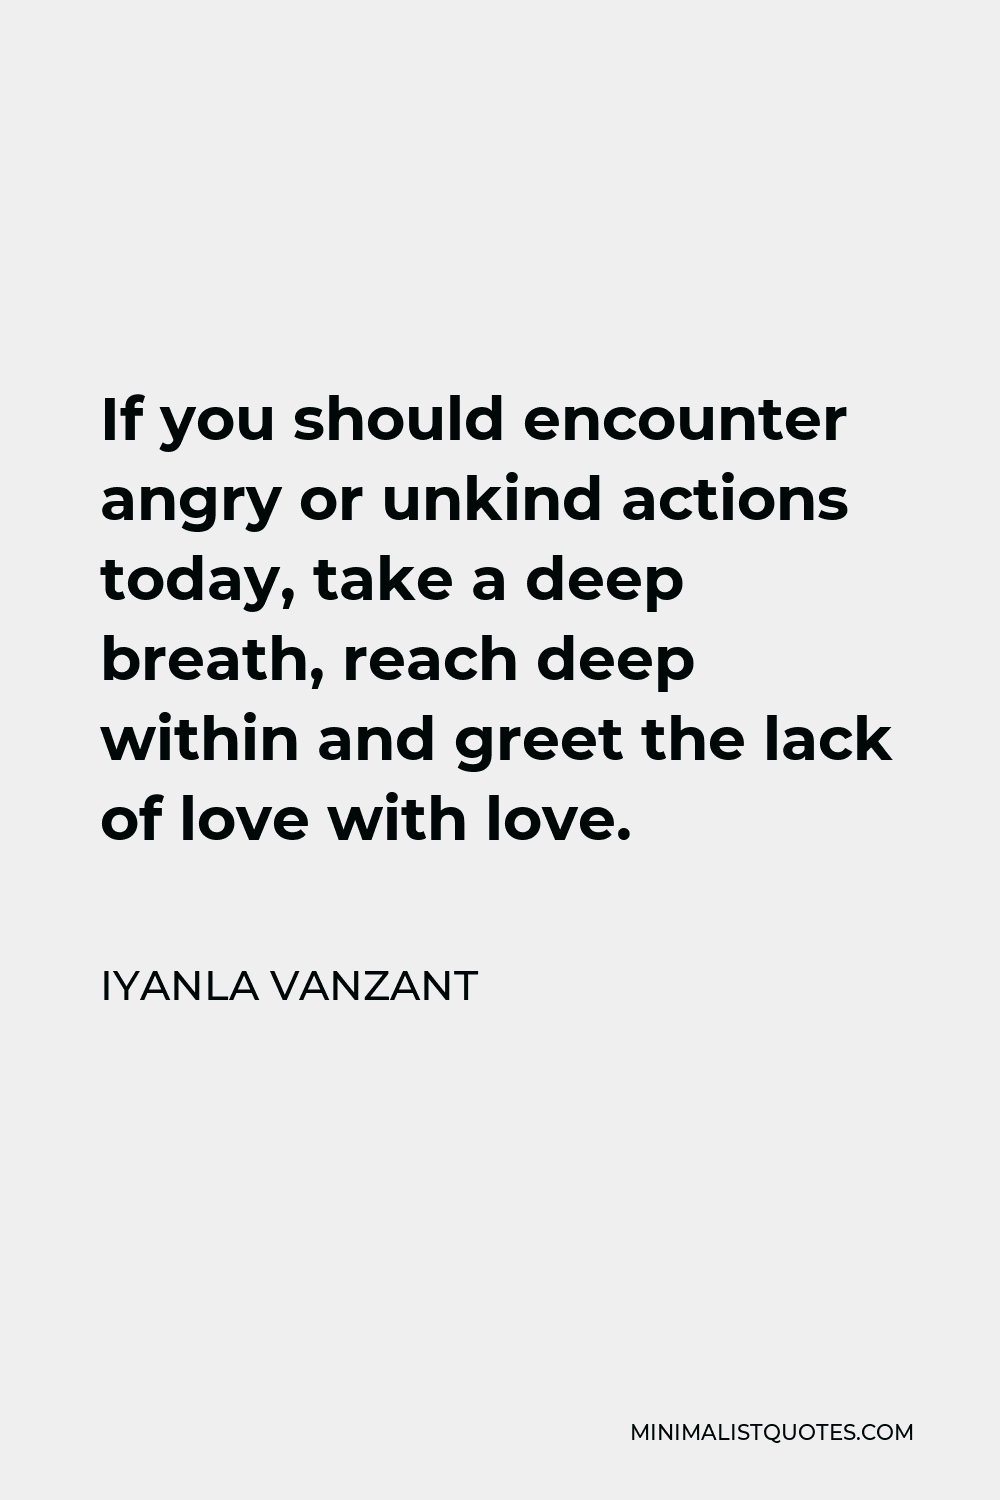 Iyanla Vanzant Quote - If you should encounter angry or unkind actions today, take a deep breath, reach deep within and greet the lack of love with love.